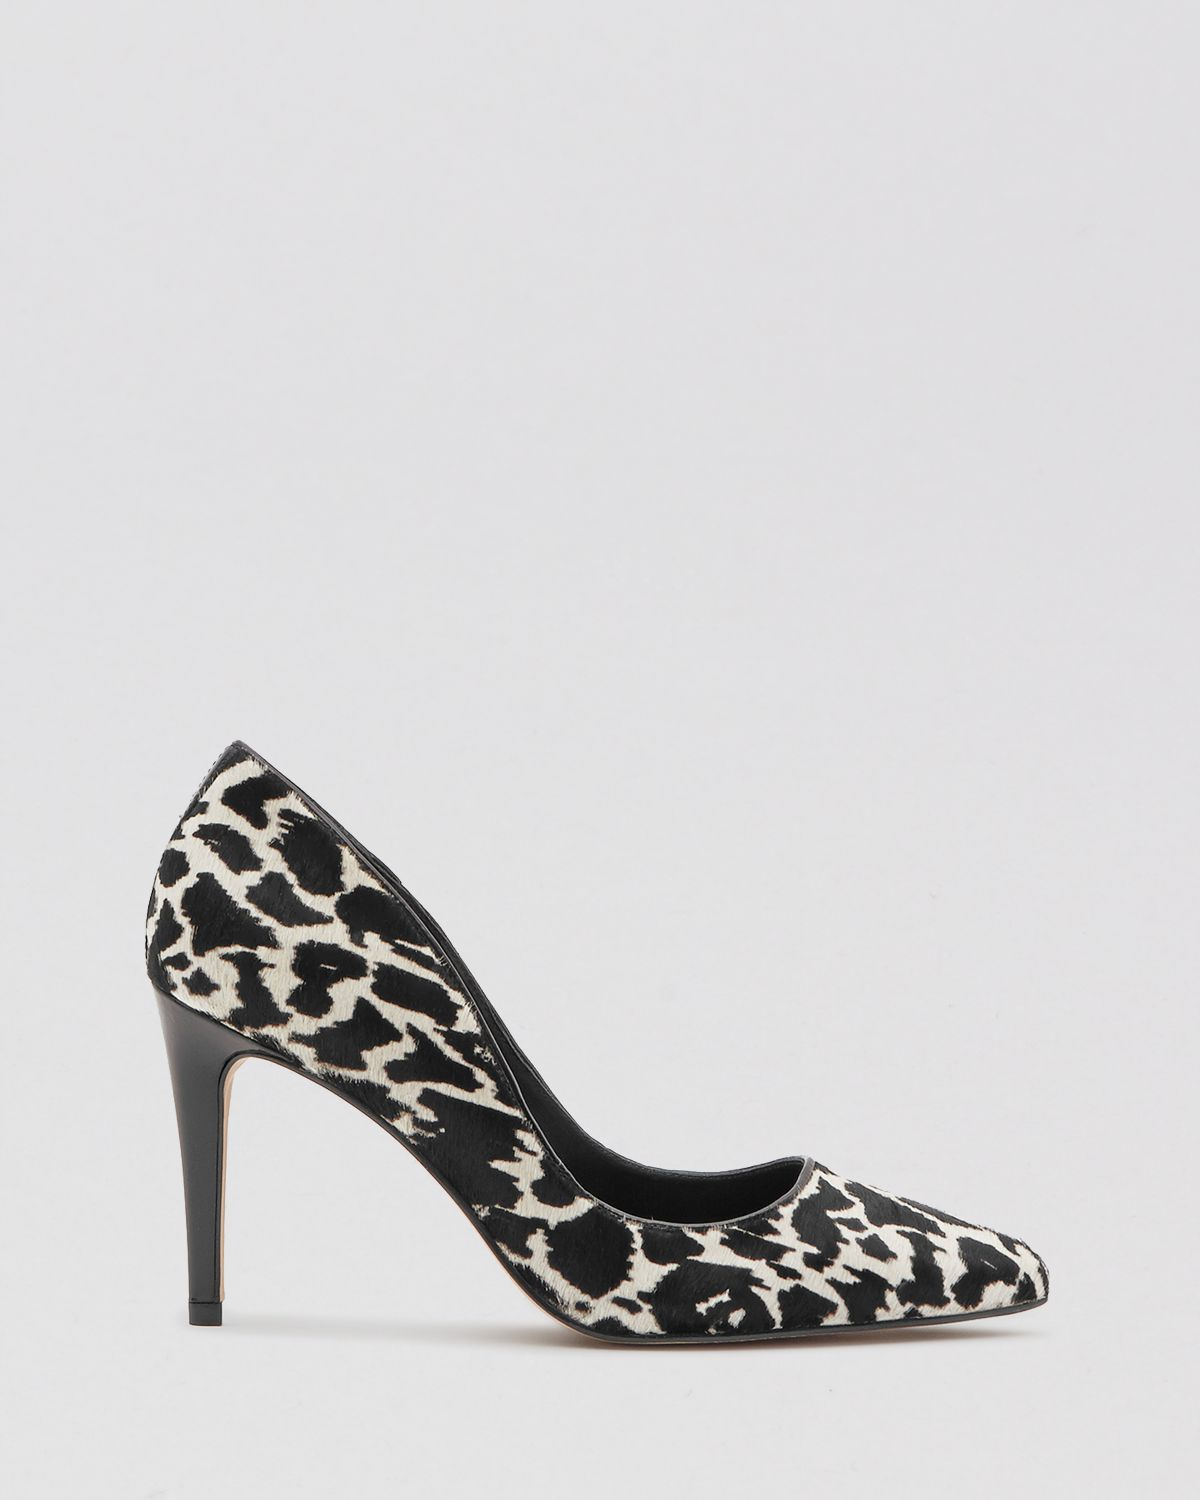 reiss-animal-pointed-toe-pumps-ivy-animal-print-court-high-heels-pumps ...